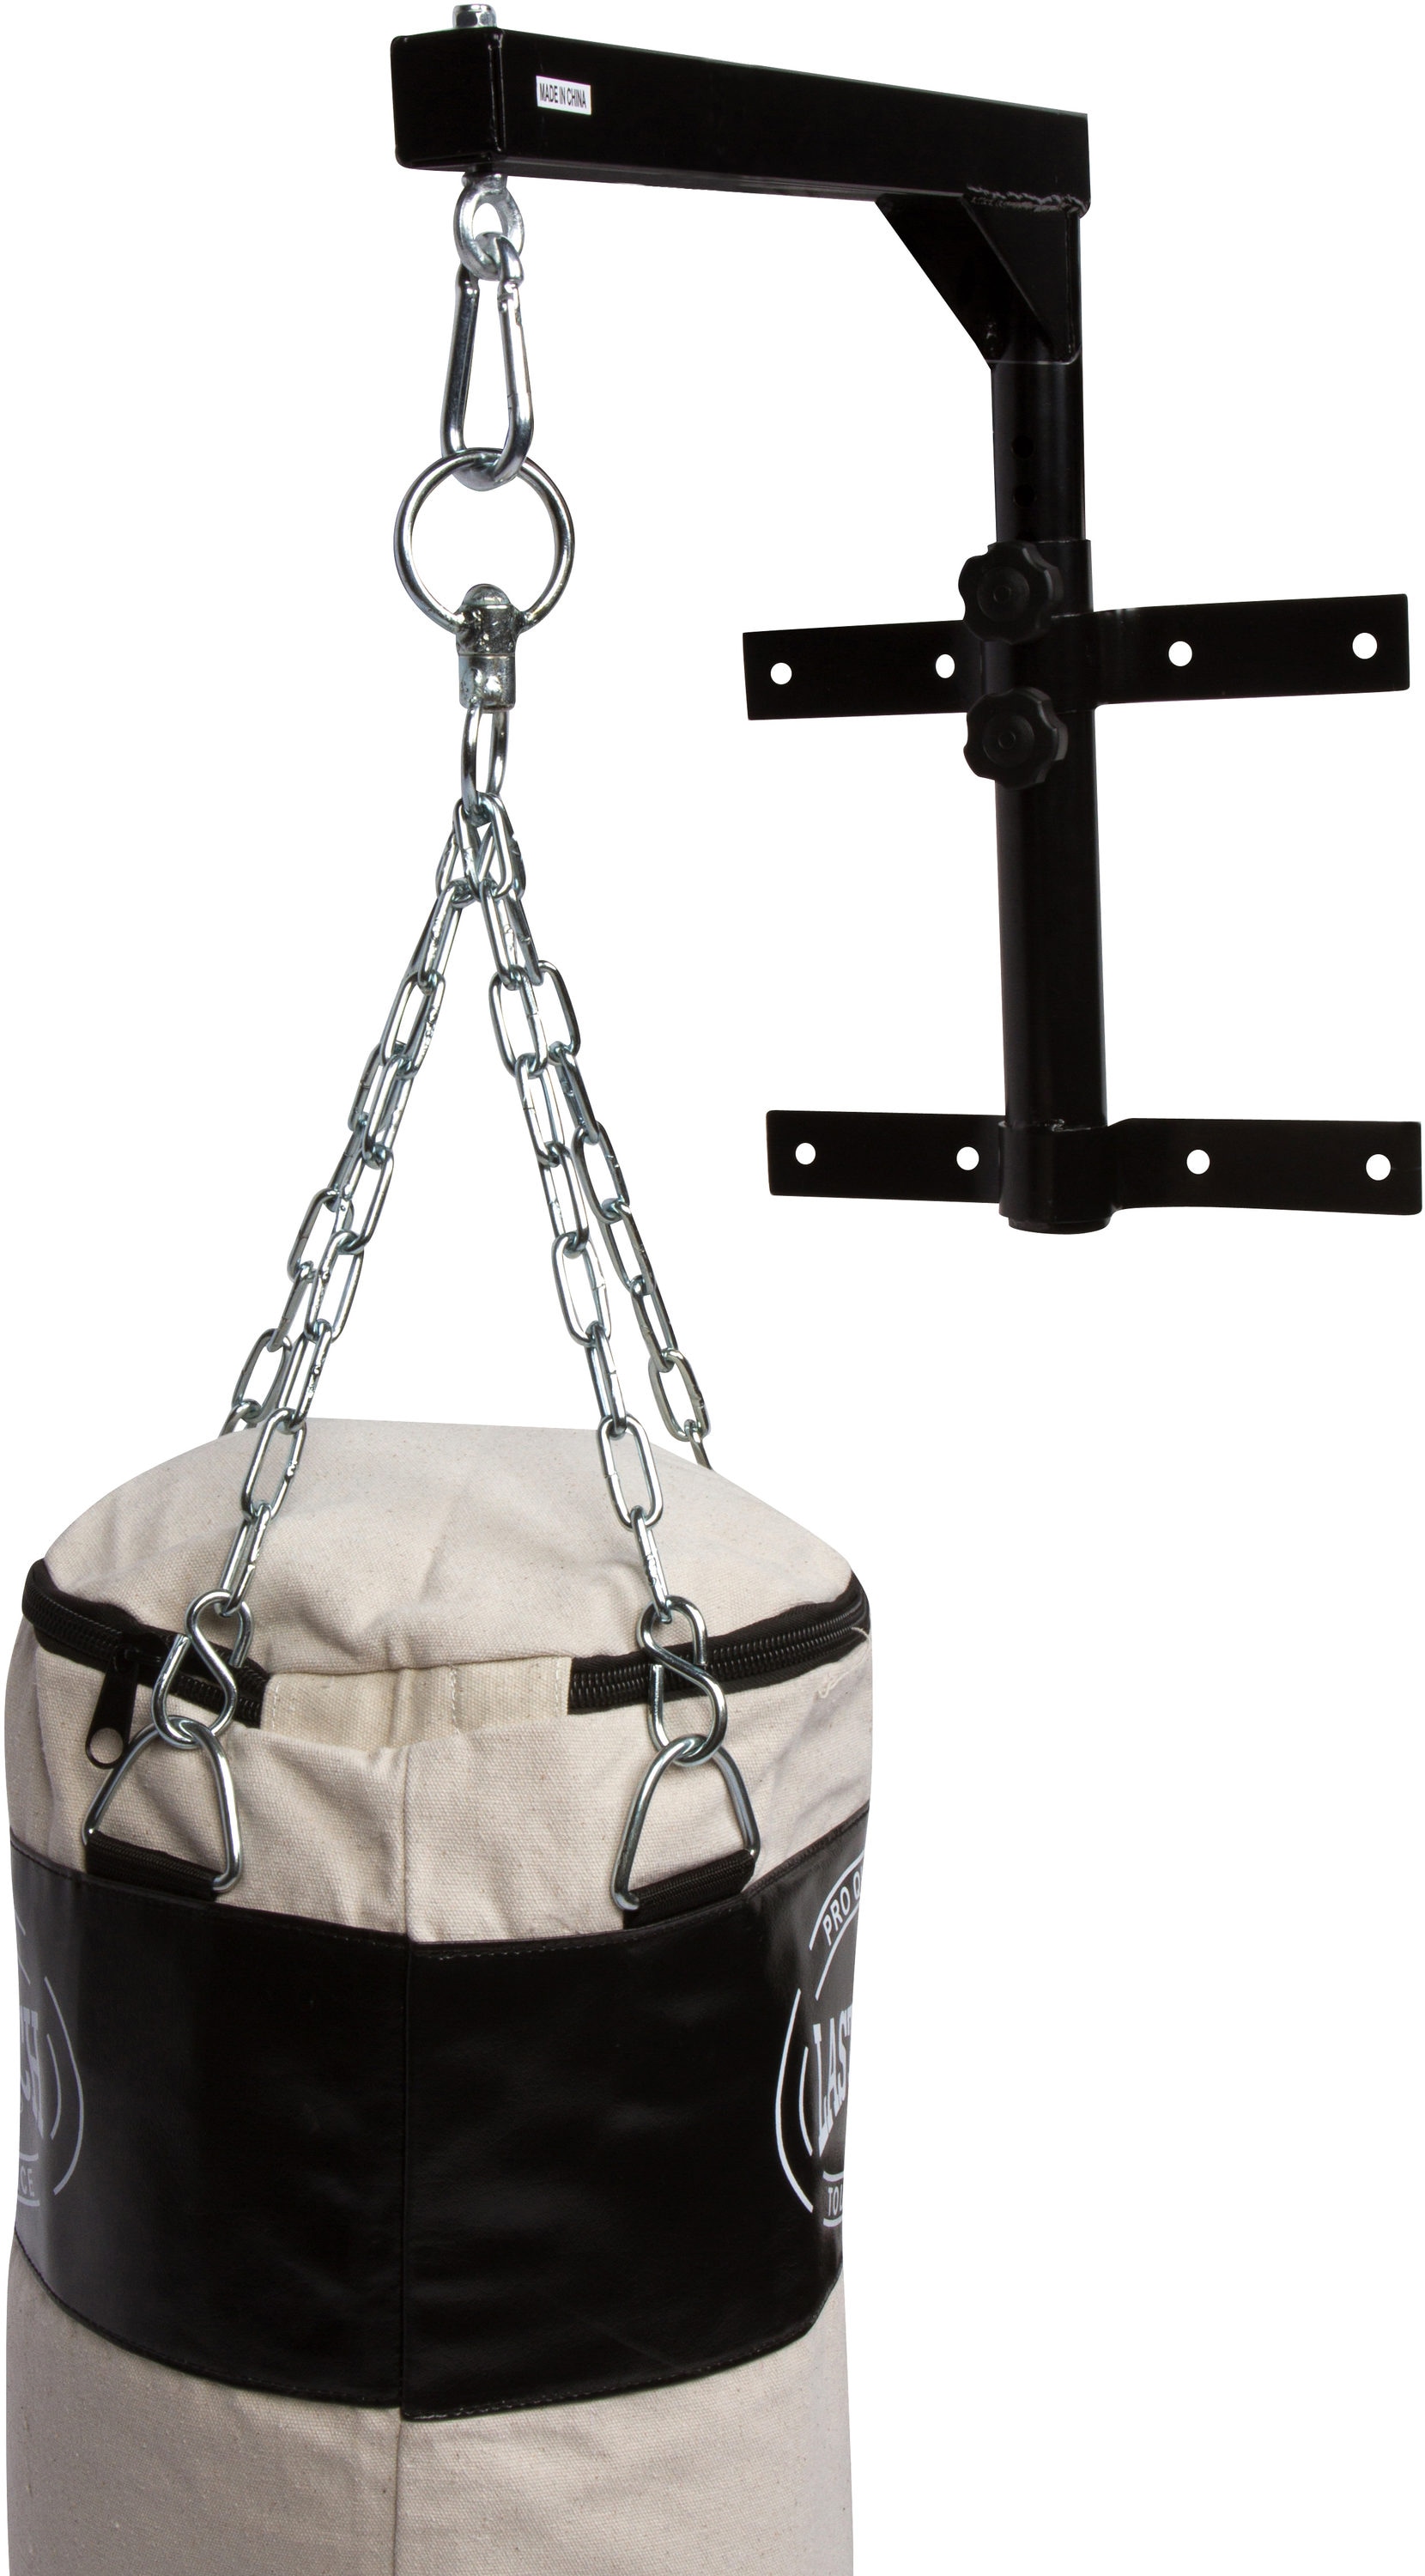 Boxing Punch Bag Hanging Wall Bracket ceiling hook mount Steel Chain Indoor Gym 